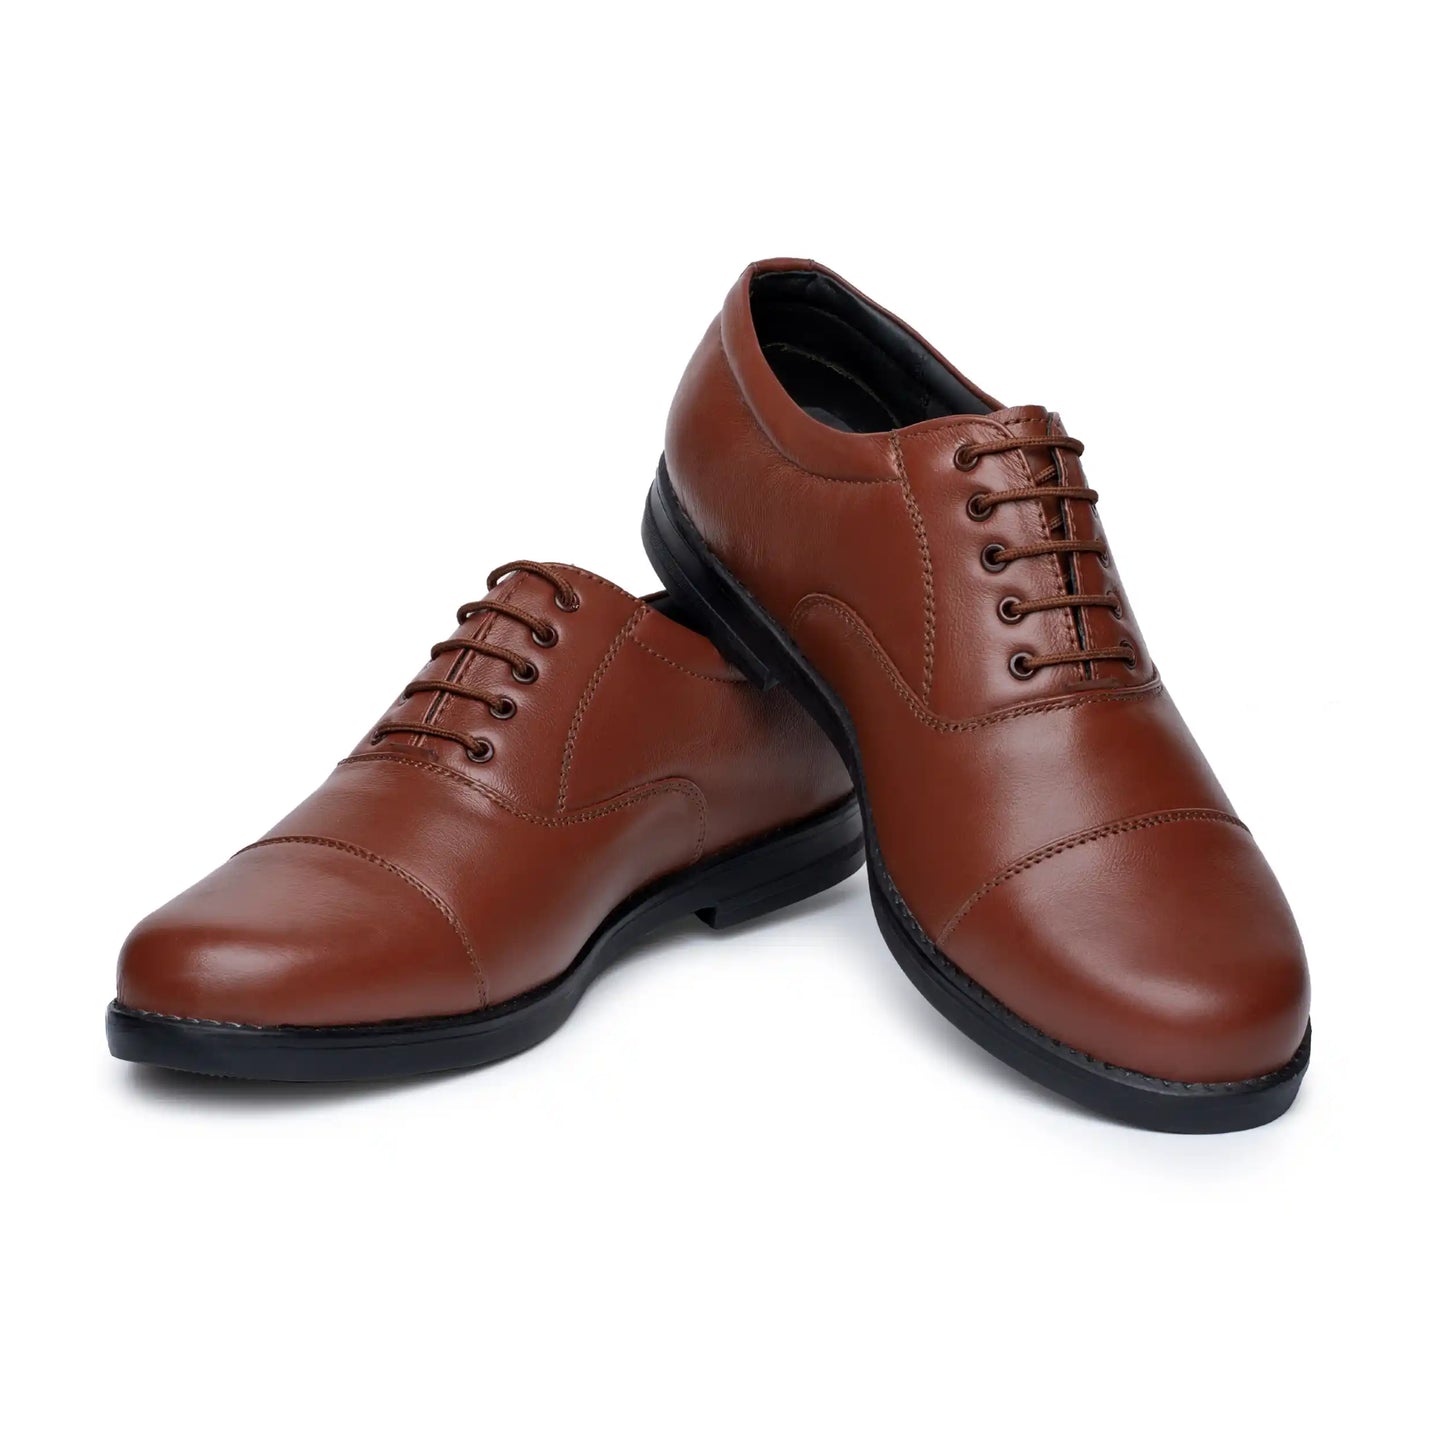 Police Shoes Pure Leather Lace Up